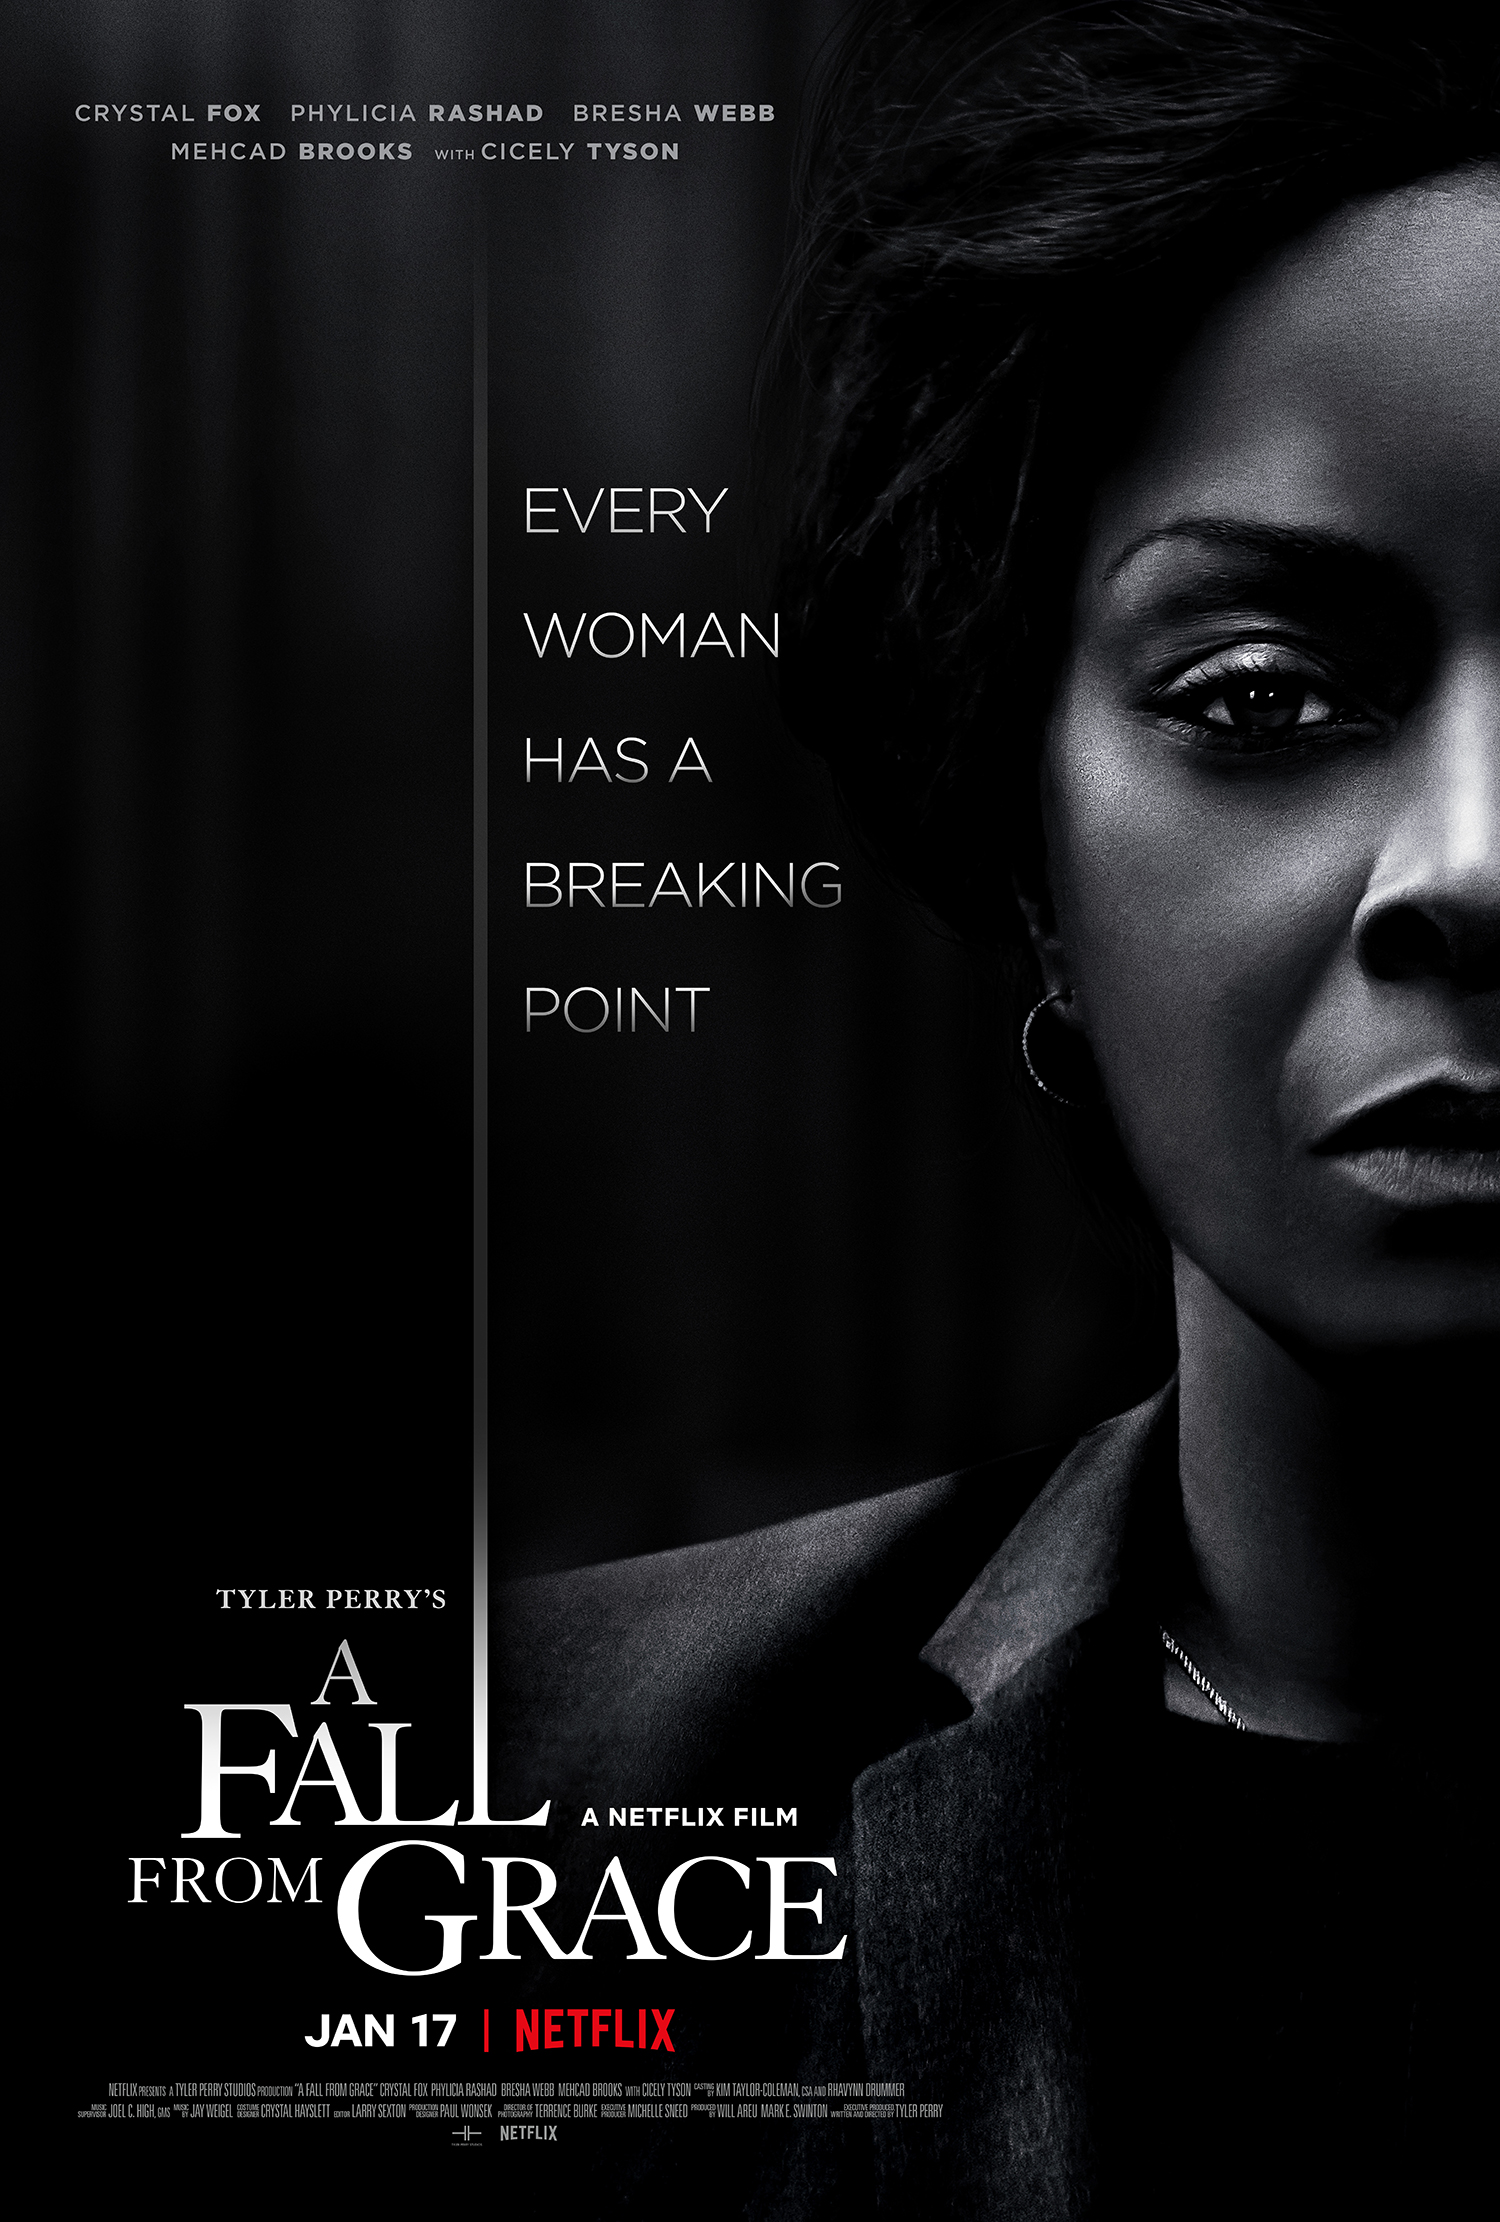 Key art and stills from Tyler Perry's Netflix film 'A Fall From Grace'